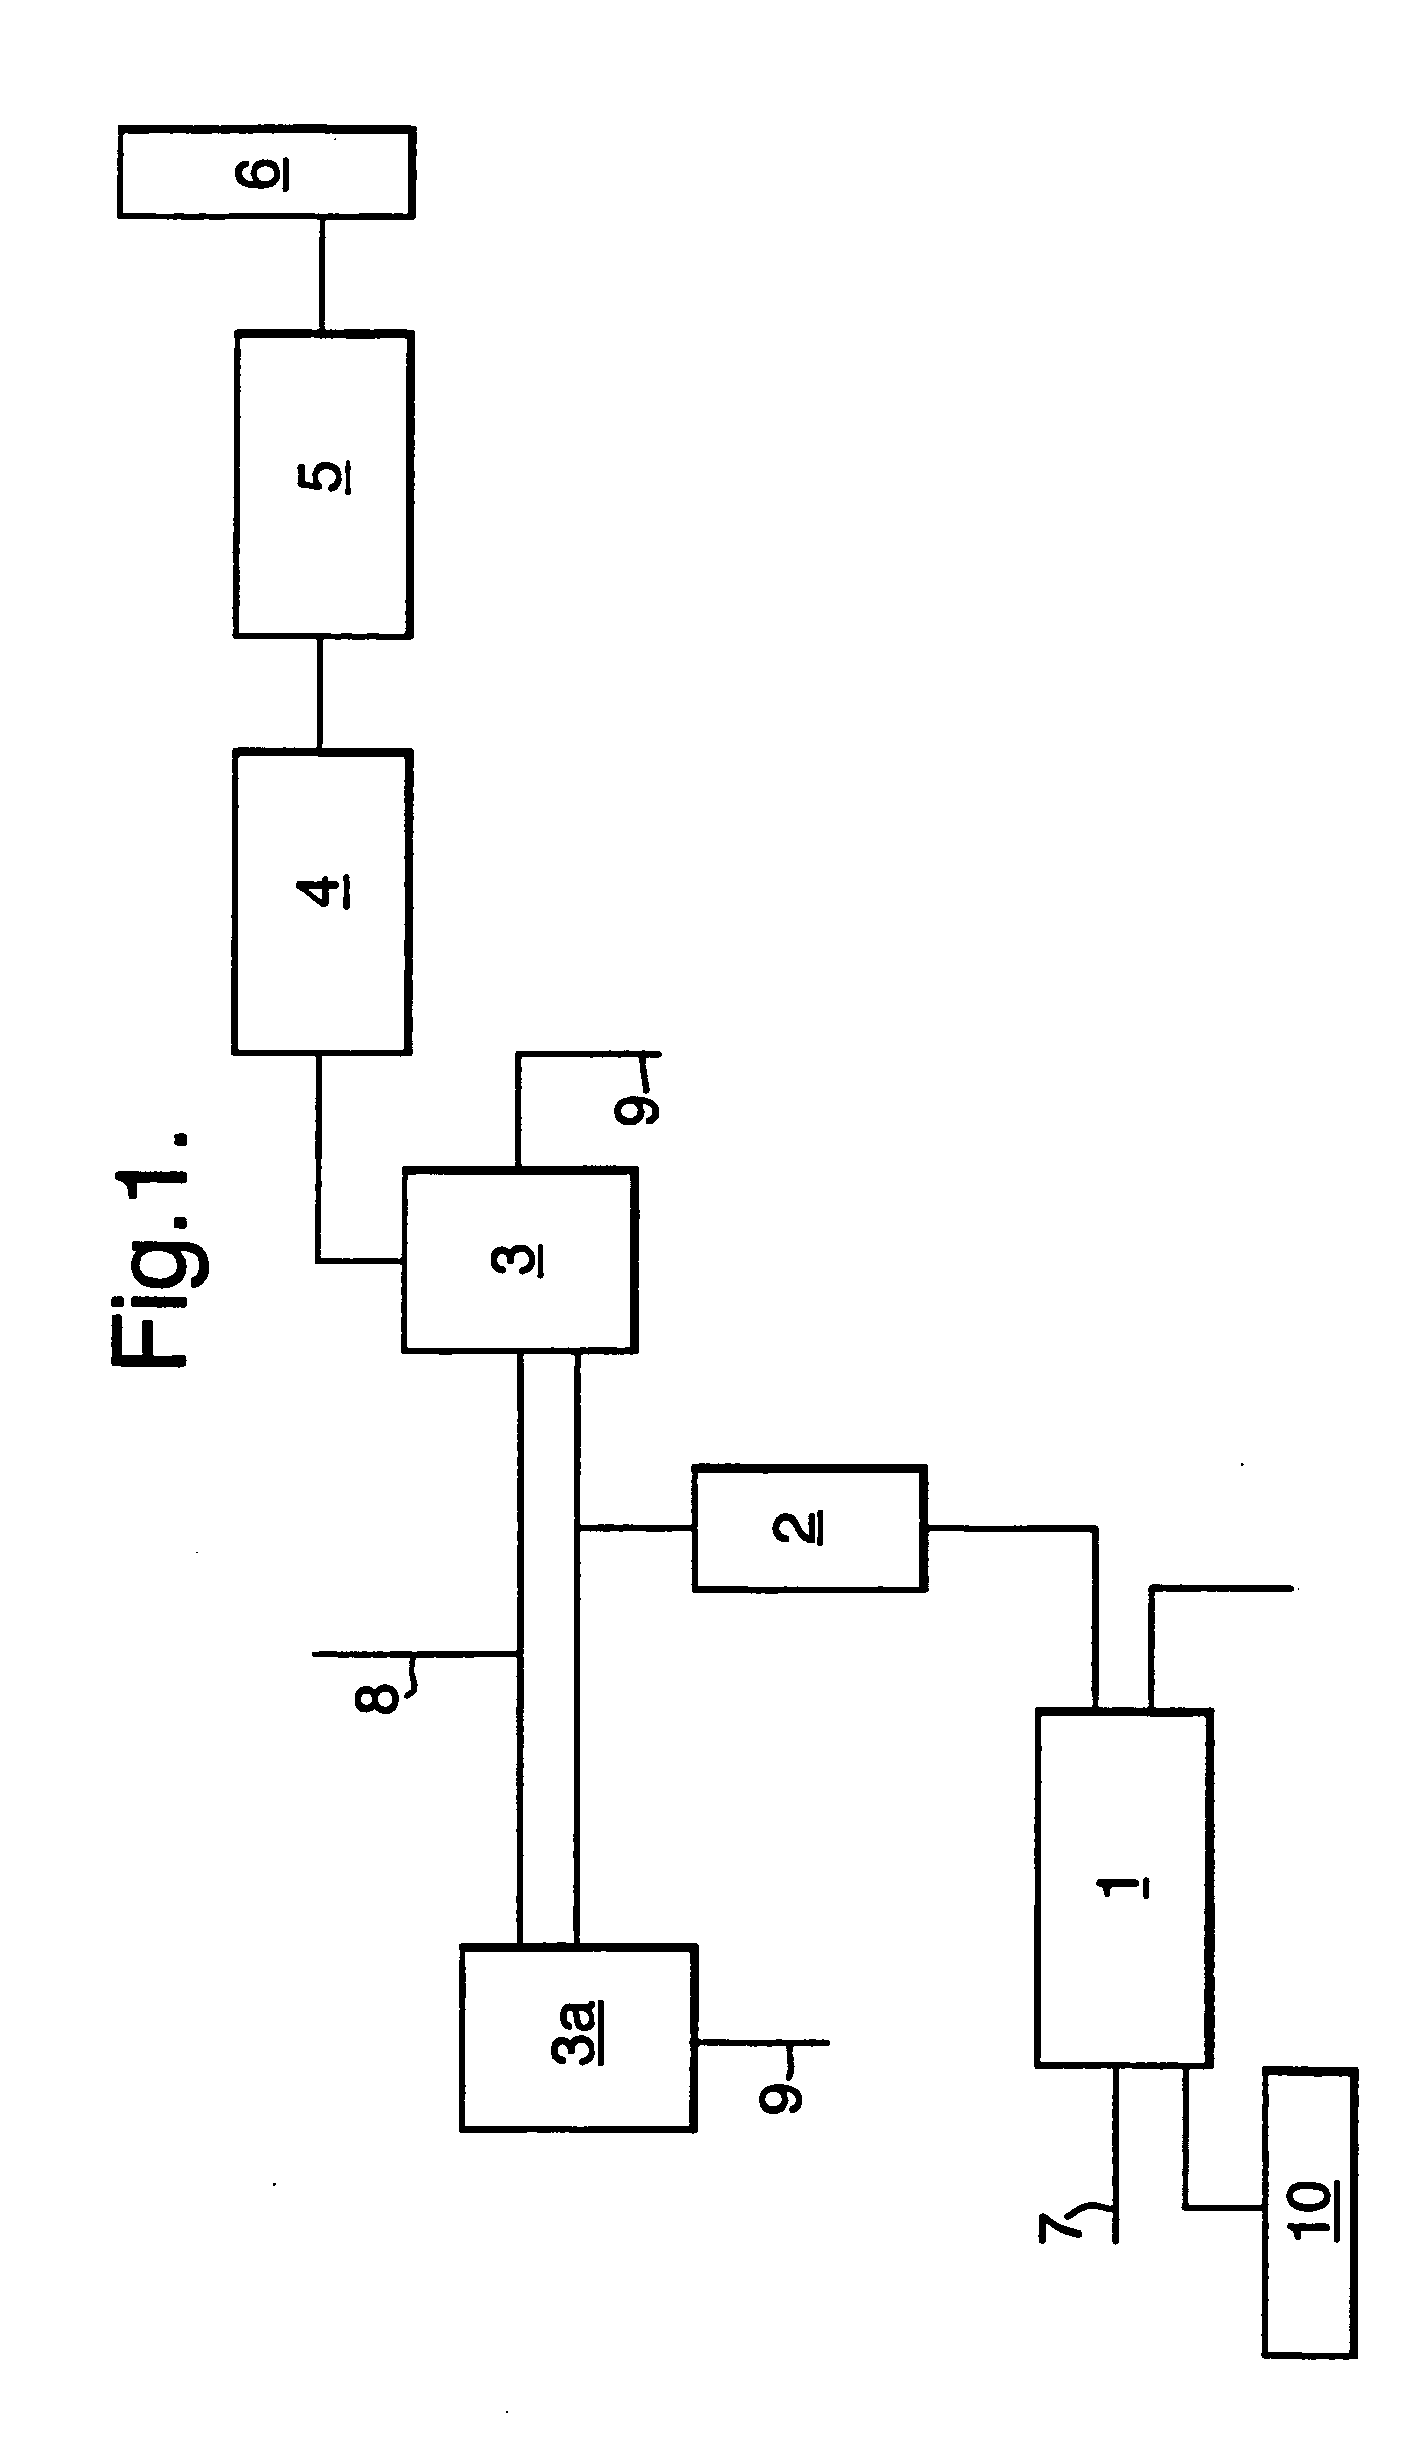 Method and process for co-combustion in a waste to-energy facility